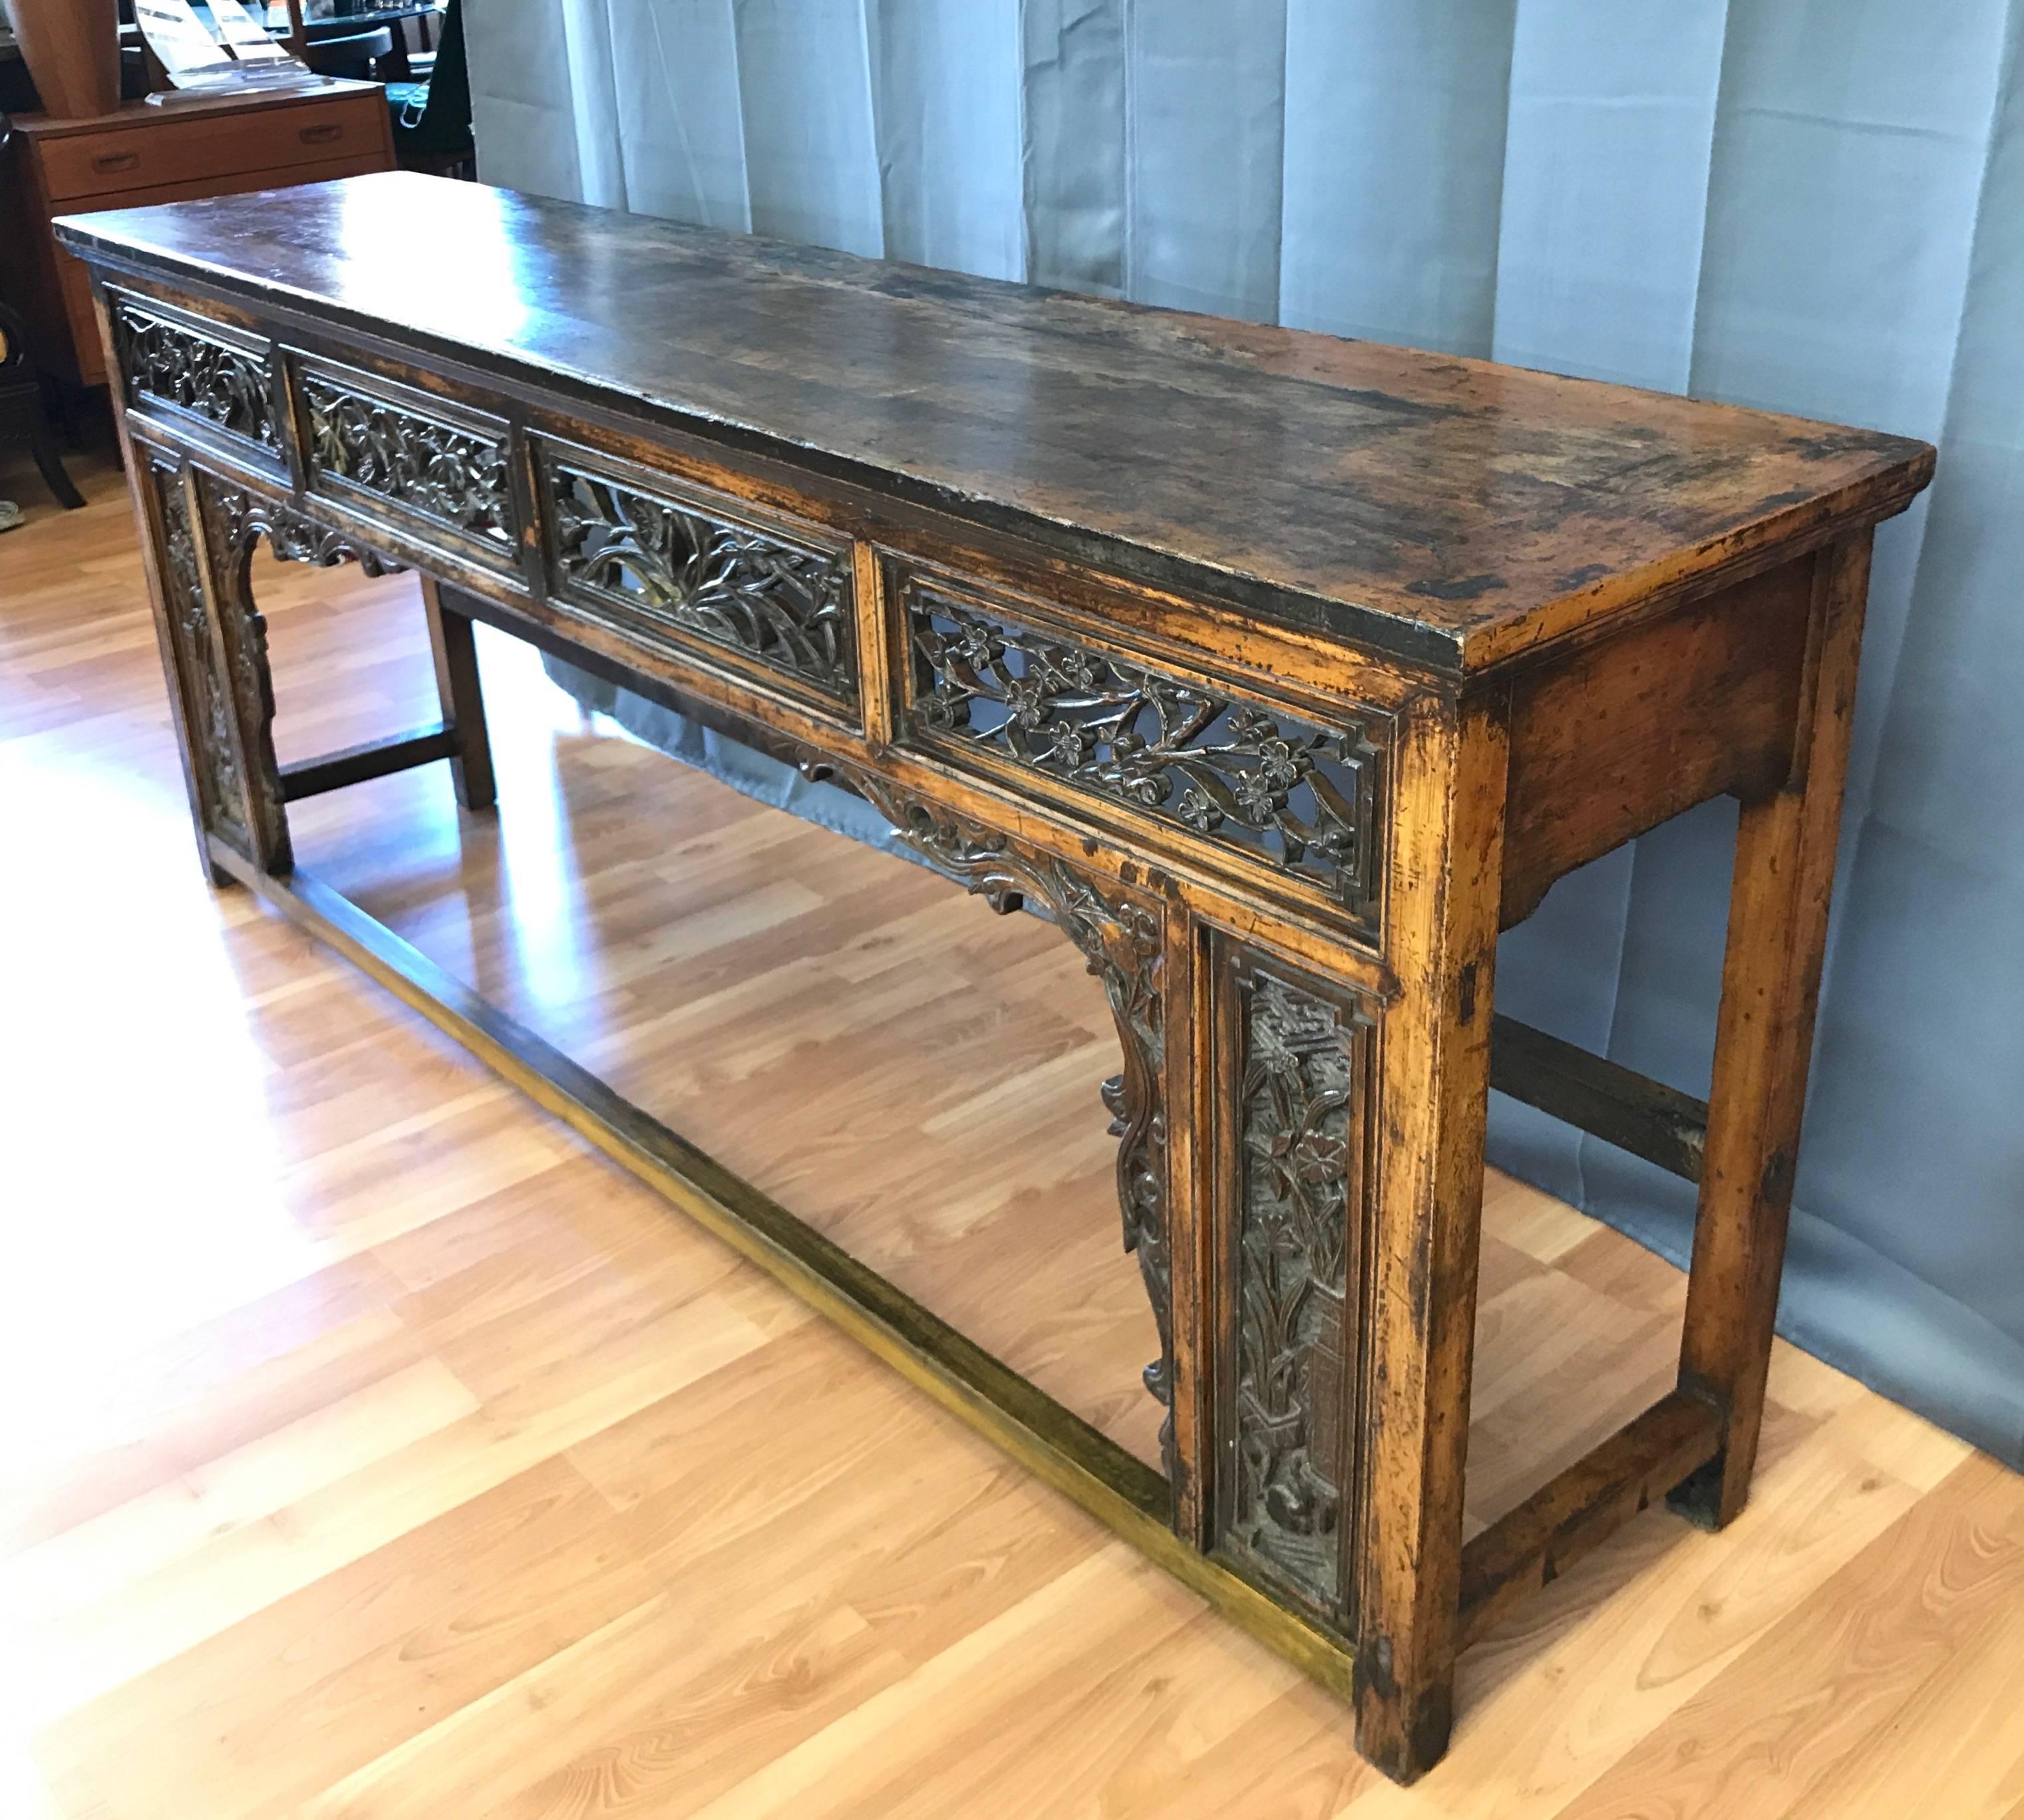 A long antique Chinese altar, console, or sofa table dating from the Qing dynasty.

Delicately hand-carved mahogany apron, deep relief panels, and intricate skirt embellishments have a lively flora motif that invites closer inspection. Table is